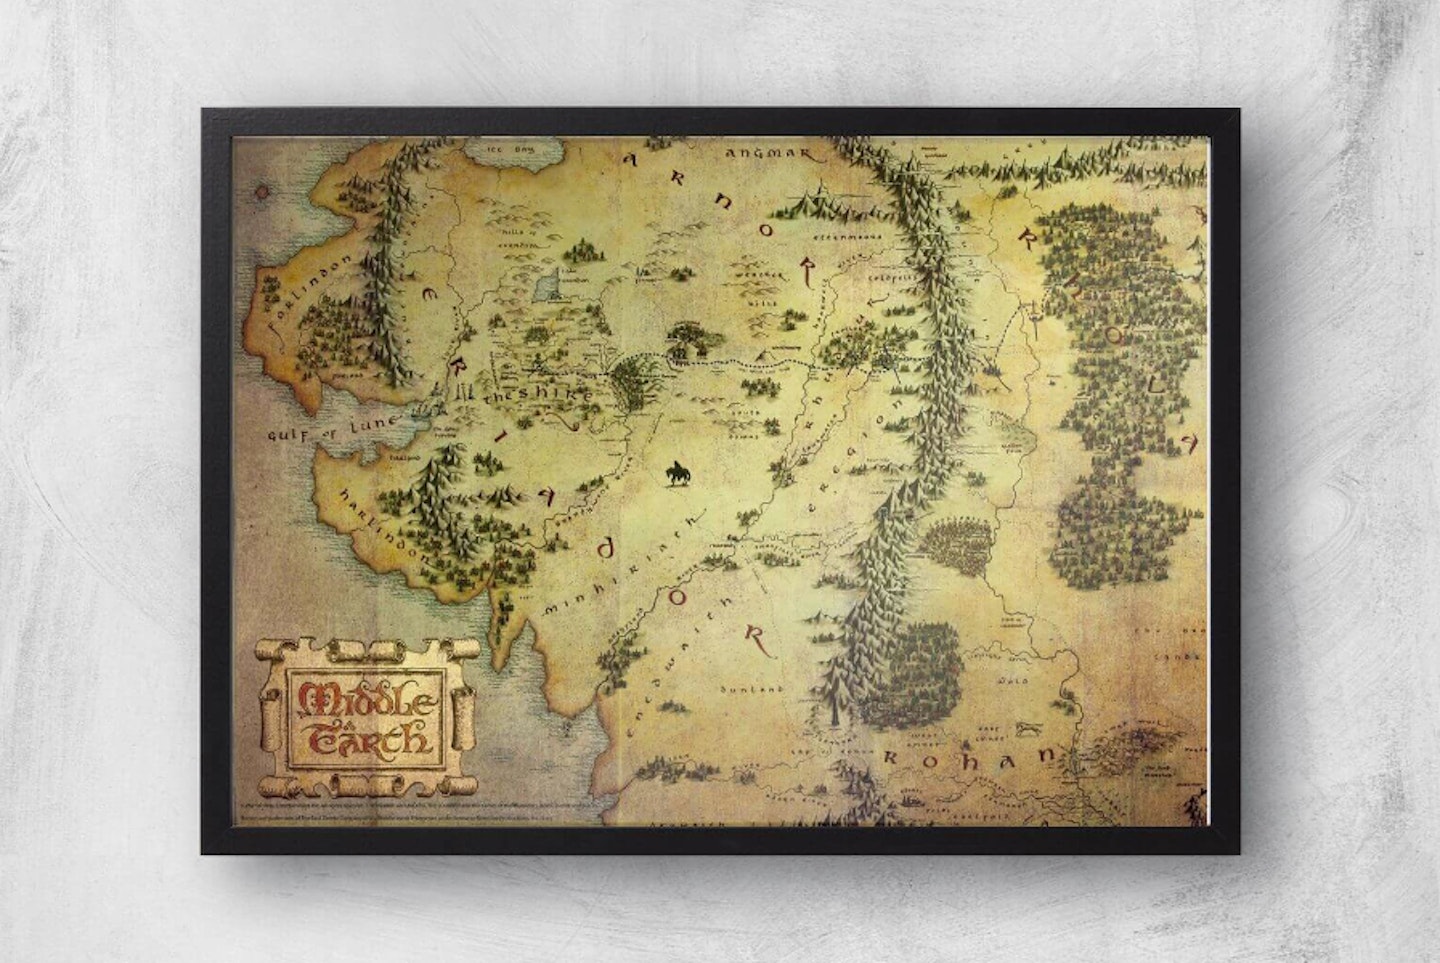 The Hobbit "Middle Earth Map" Canvas Print